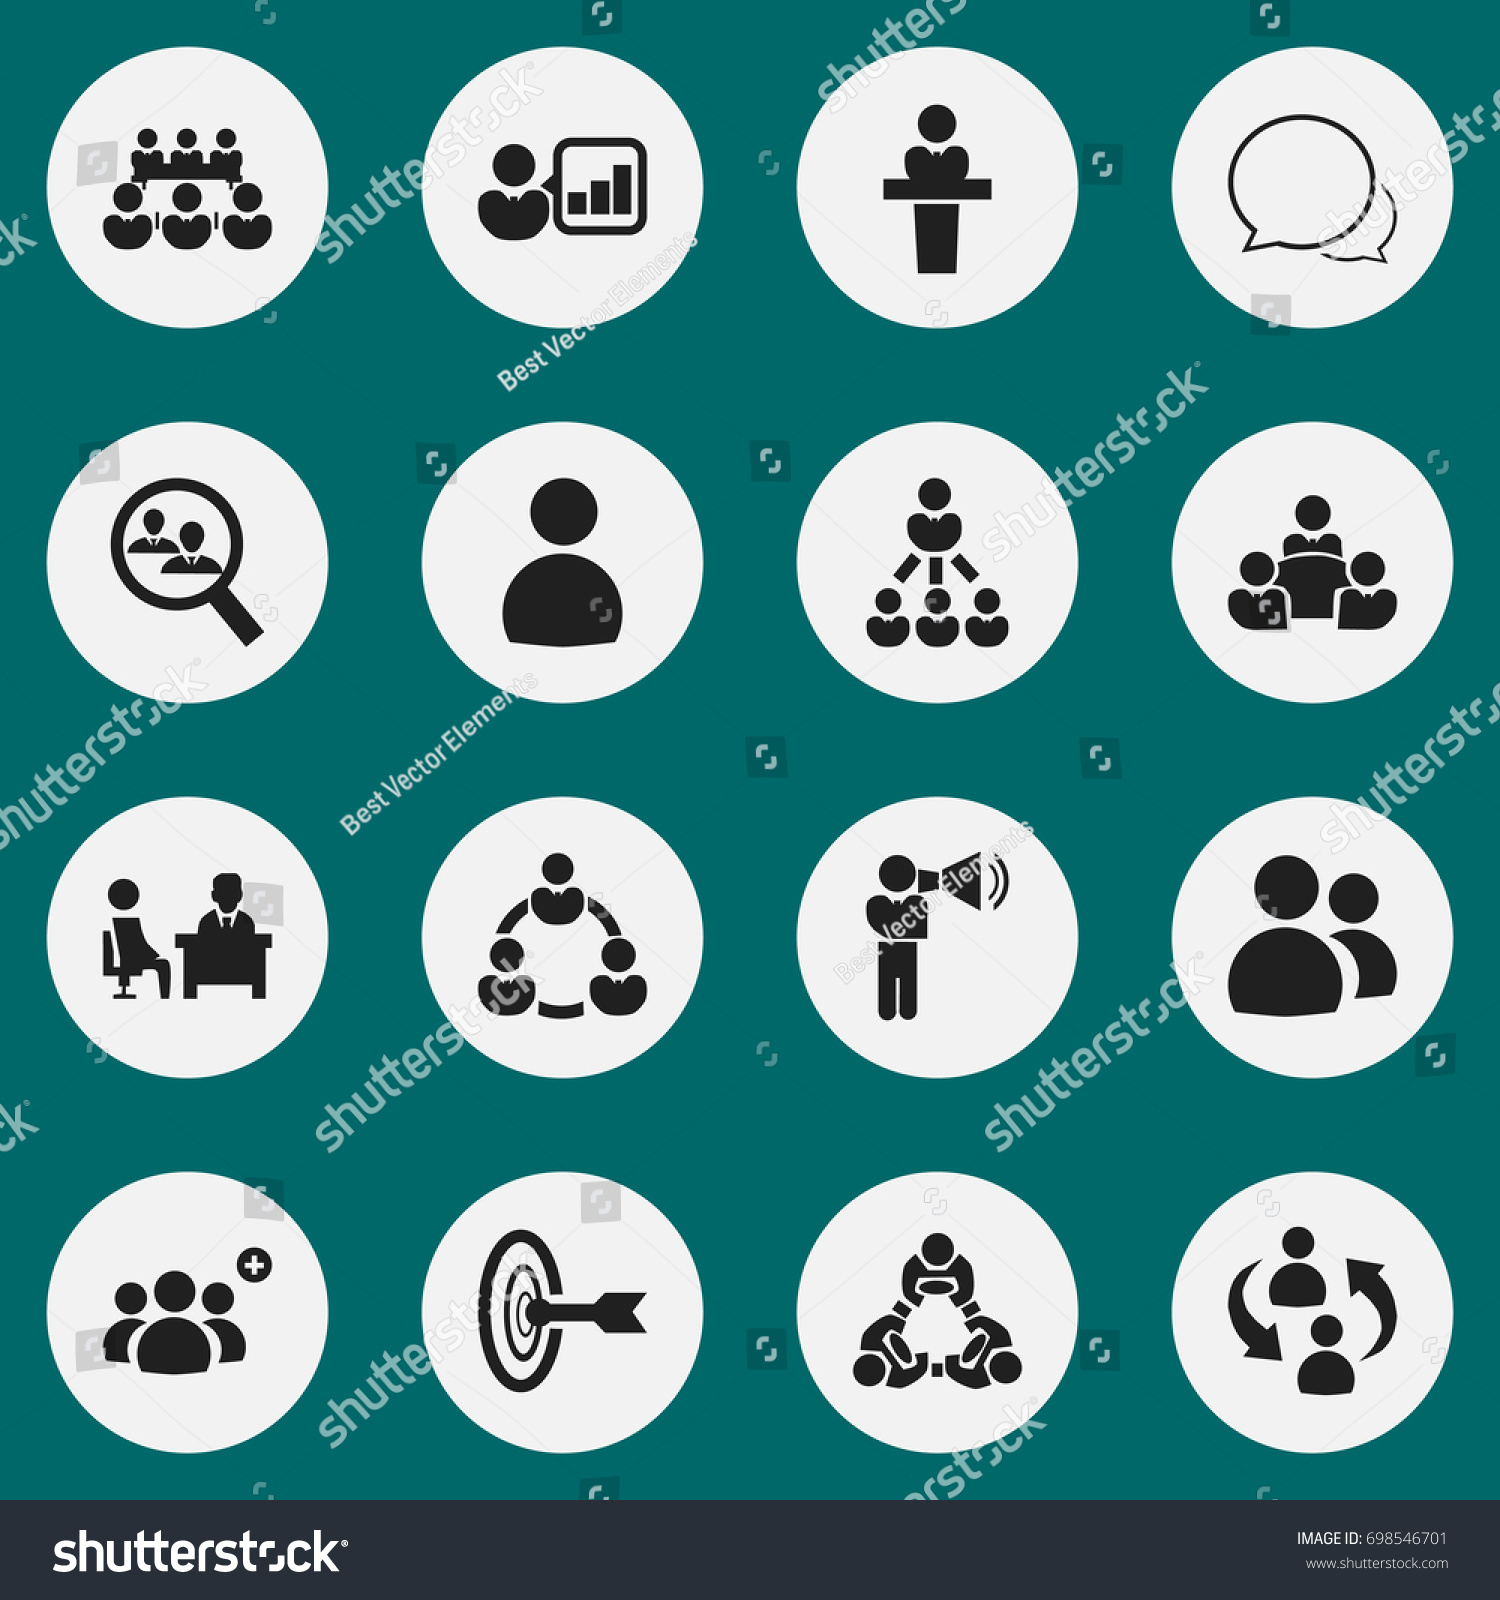 SVG of Set Of 16 Editable Team Icons. Includes Symbols Such As Meeting, Speaker, Debate And More. Can Be Used For Web, Mobile, UI And Infographic Design. svg